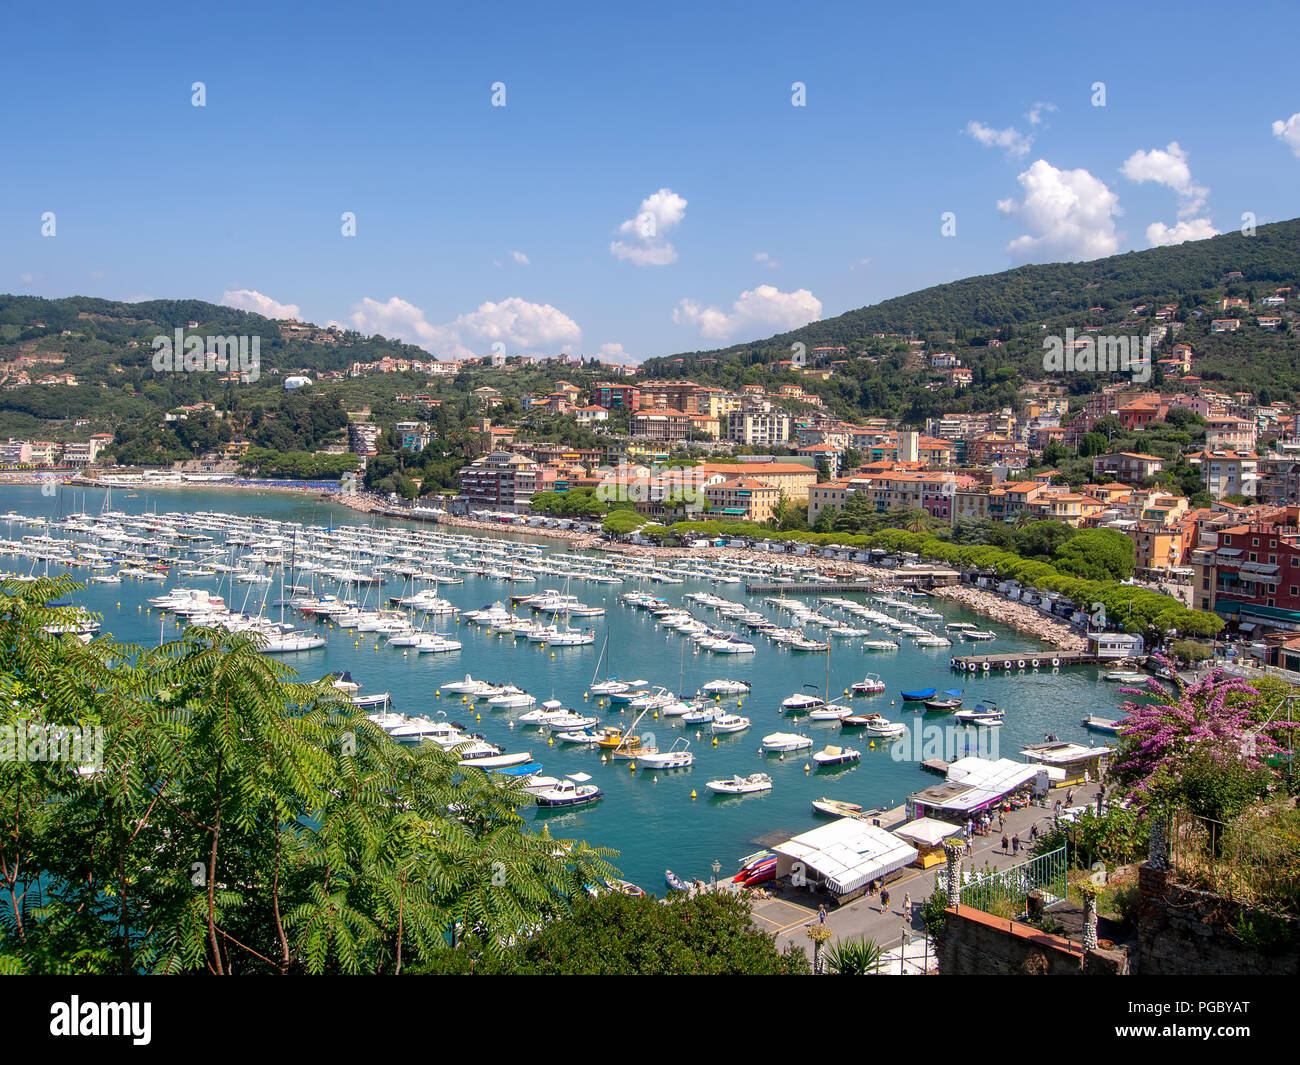 LERICI, LIGURIA, ITALY - AUGUST 18, 2018: View across the bay of popular tourist destination of Lerici on the Mediterranean coast, Italy. Busy sunny summer day. Looking towards San Terenzo village. Stock Photo